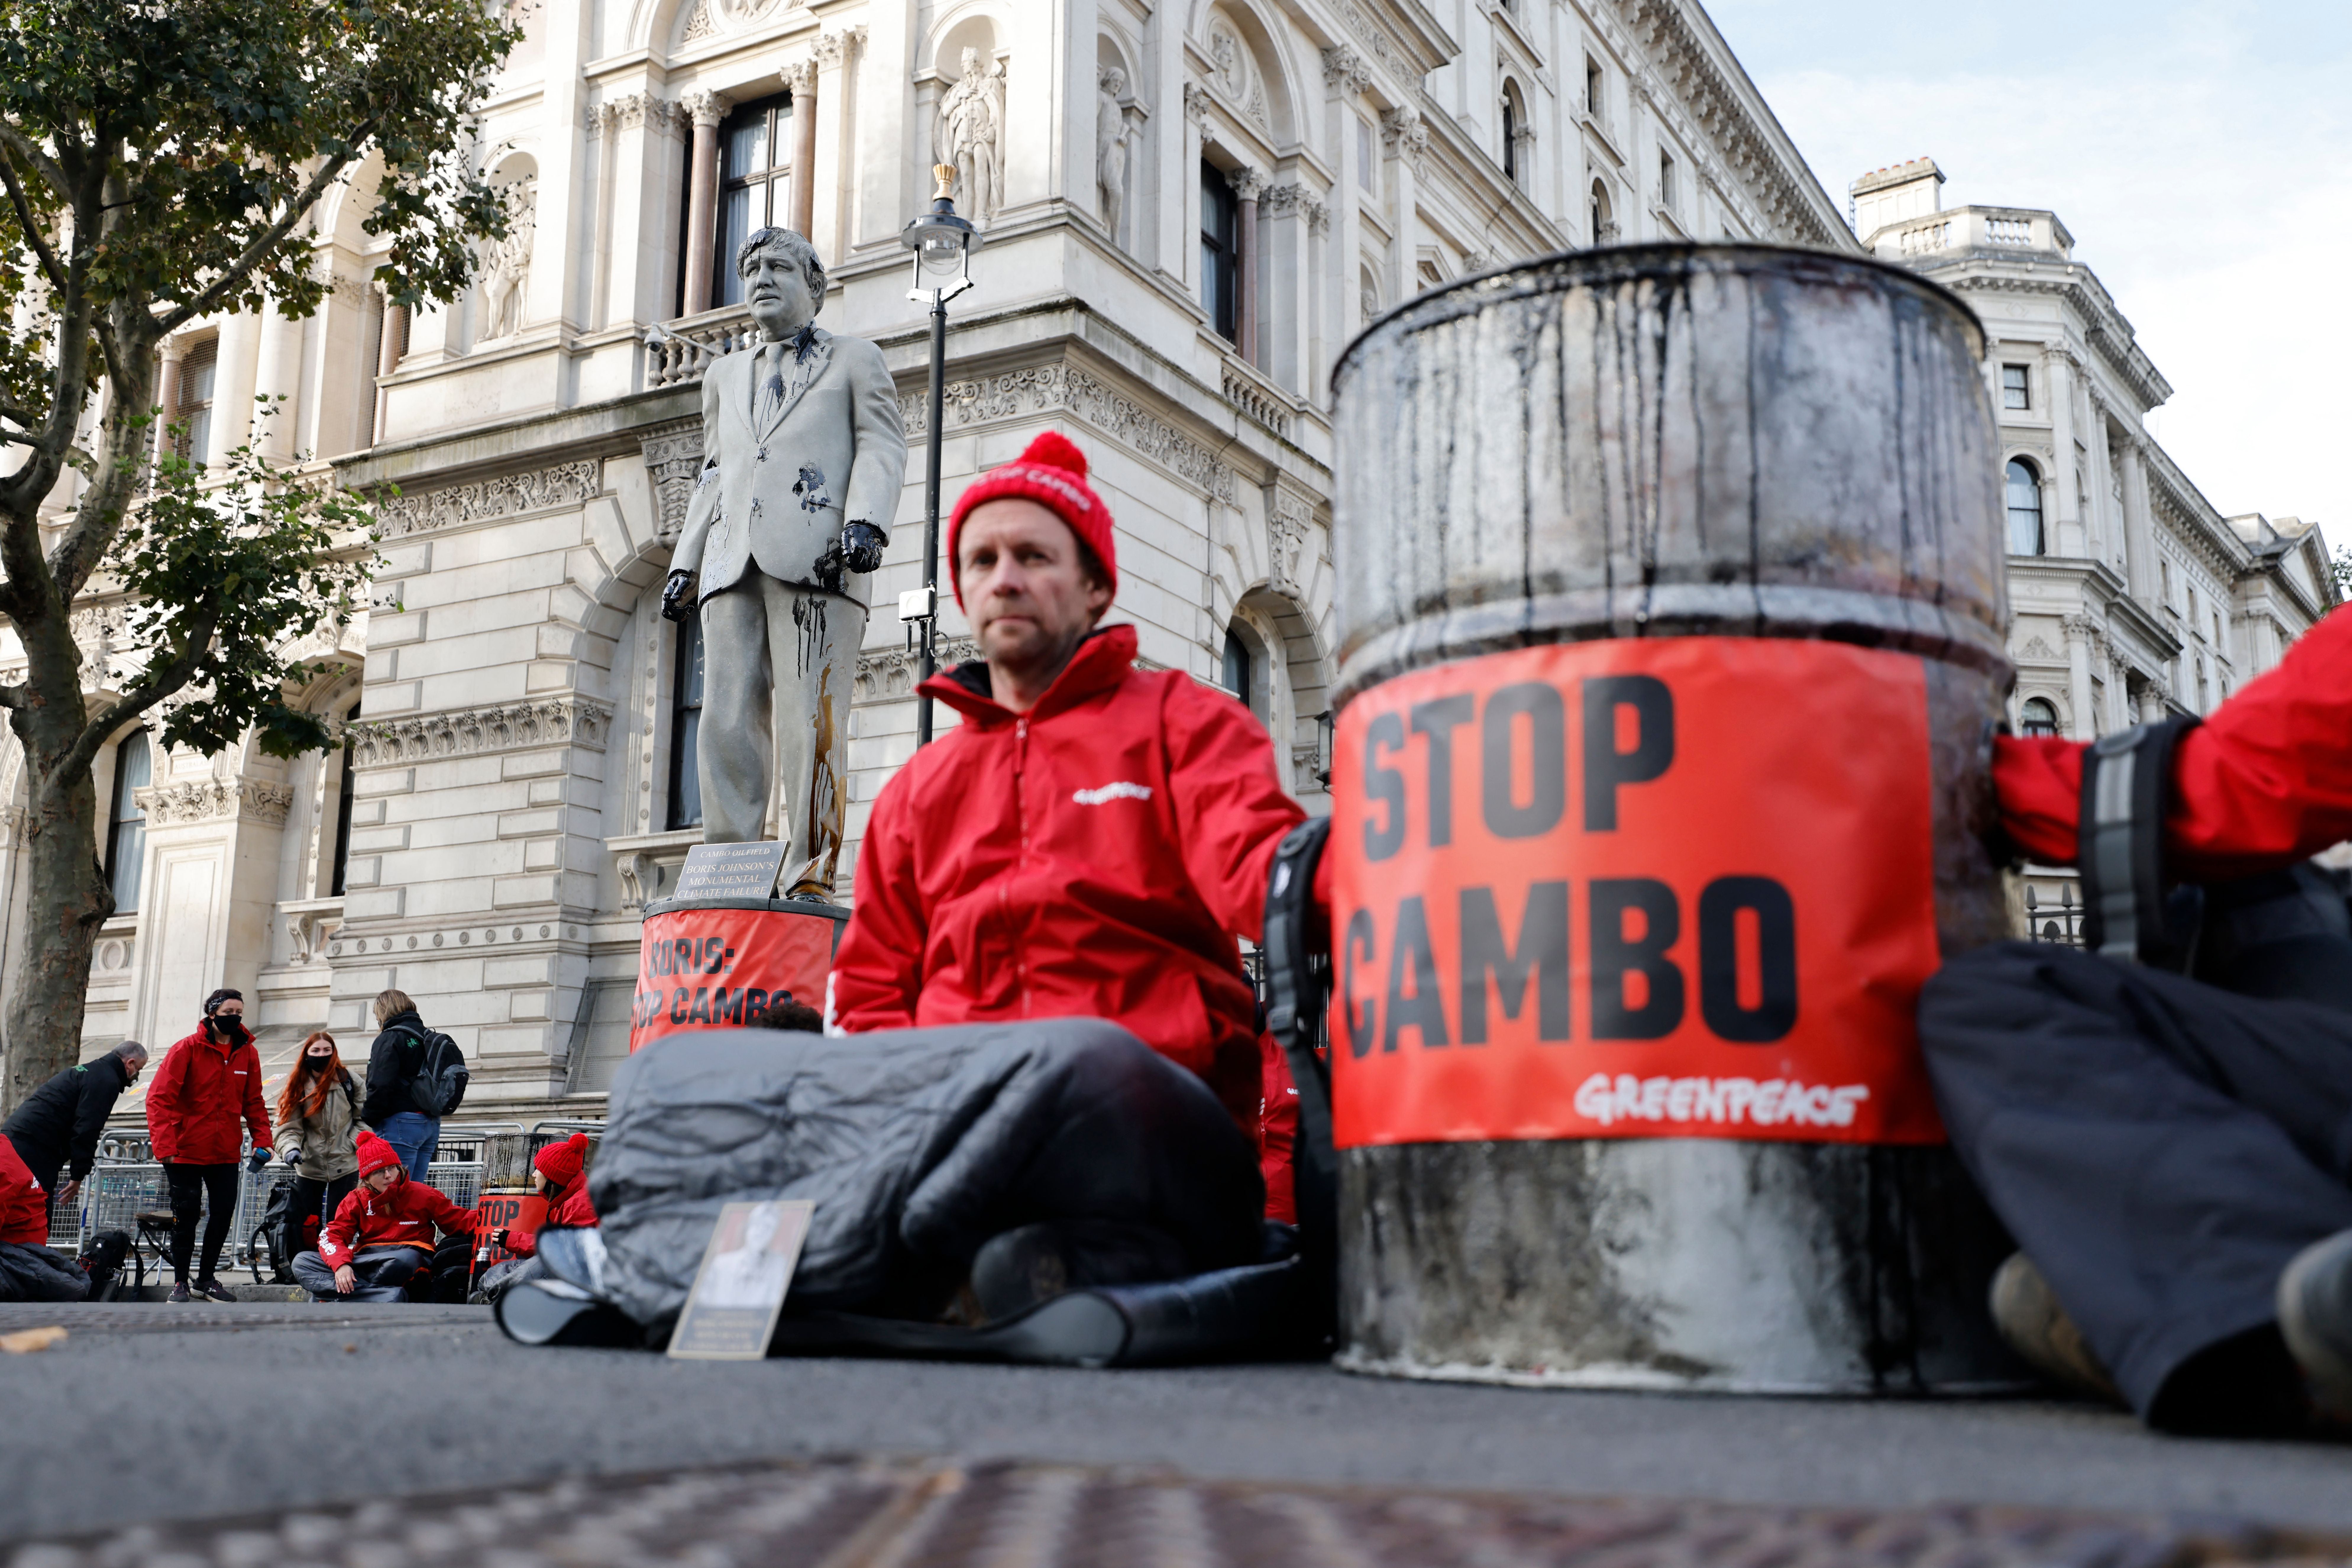 Greenpeace activists stage a Downing Street sit-in to protest against the Cambo oil field project in the Shetland Islands